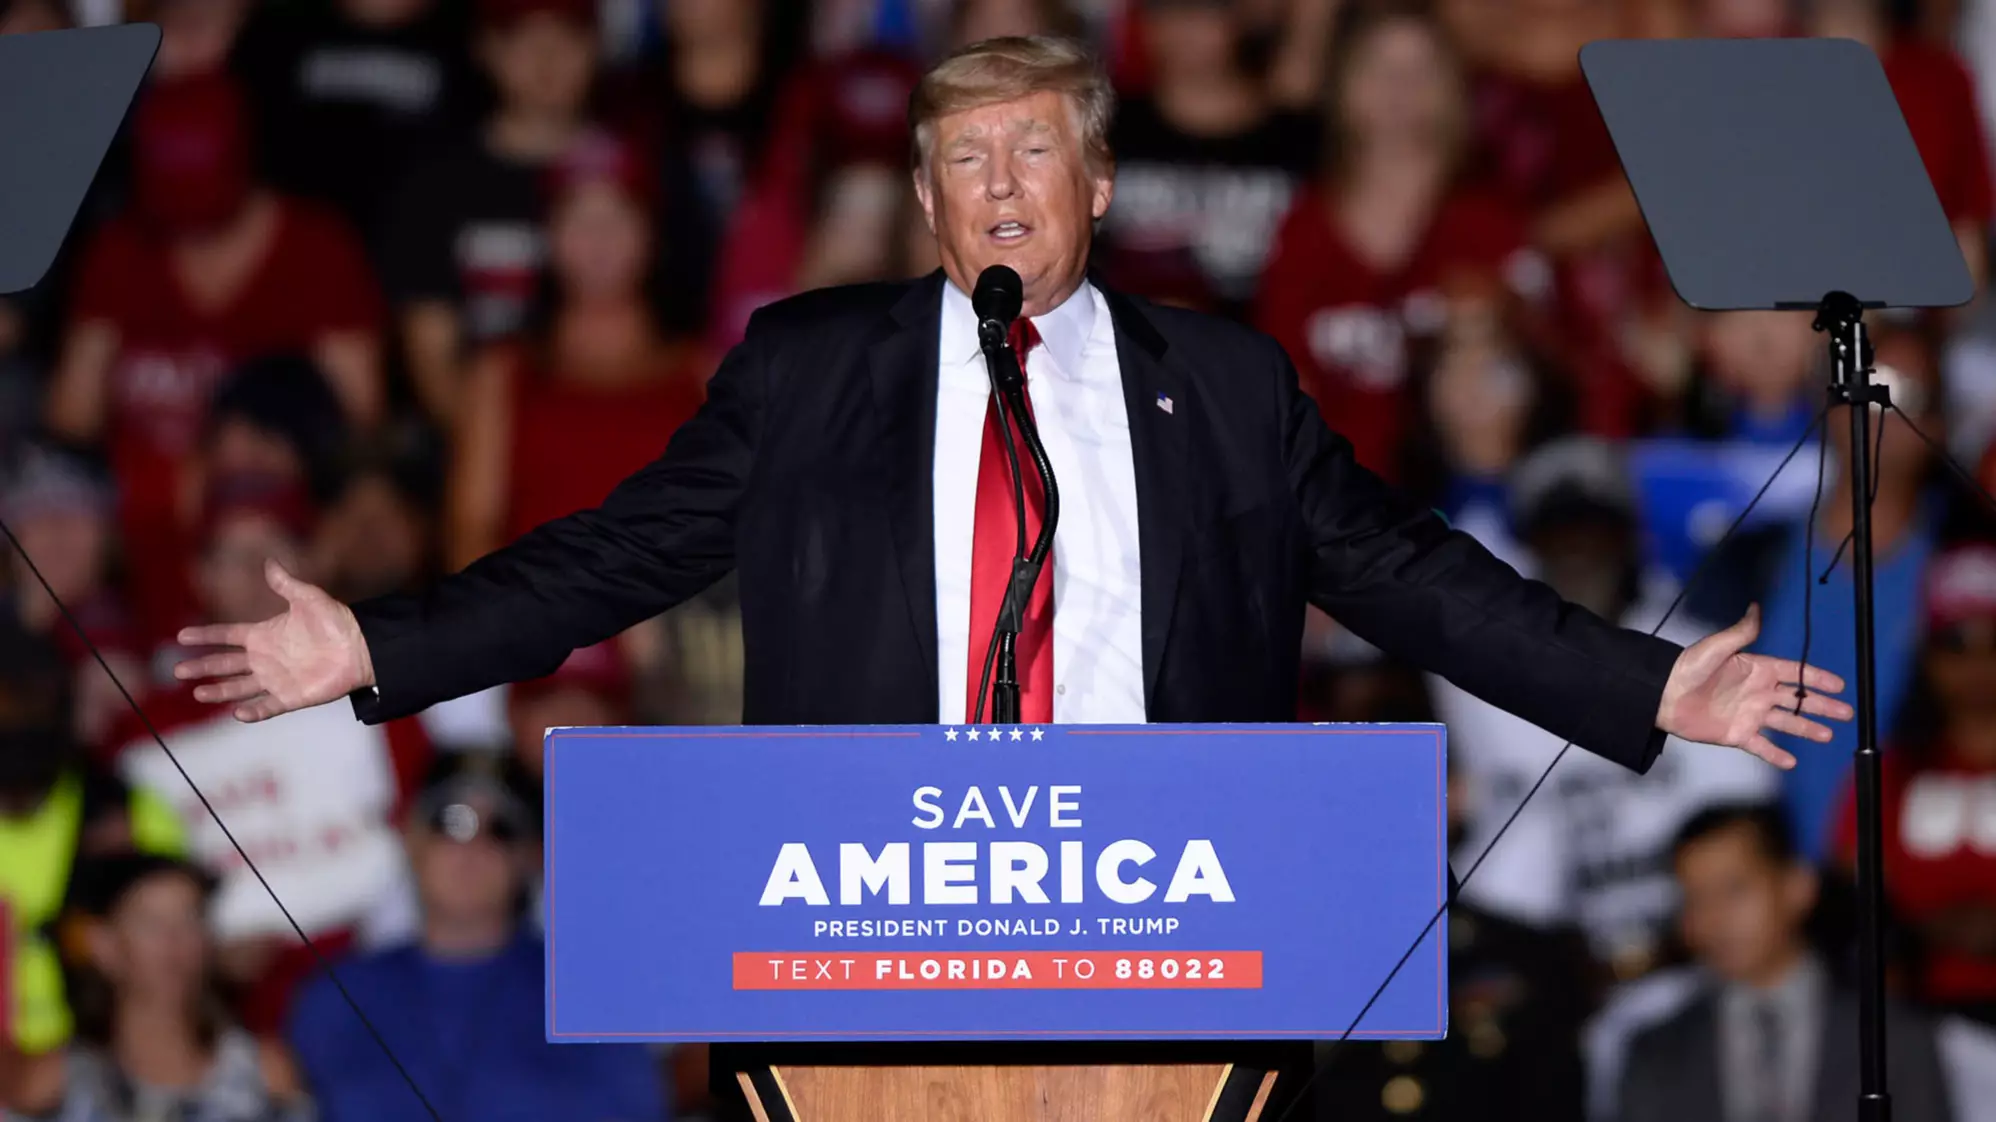 Donald Trump Claims There's No Free Speech In America During Rally In Front Of Thousands